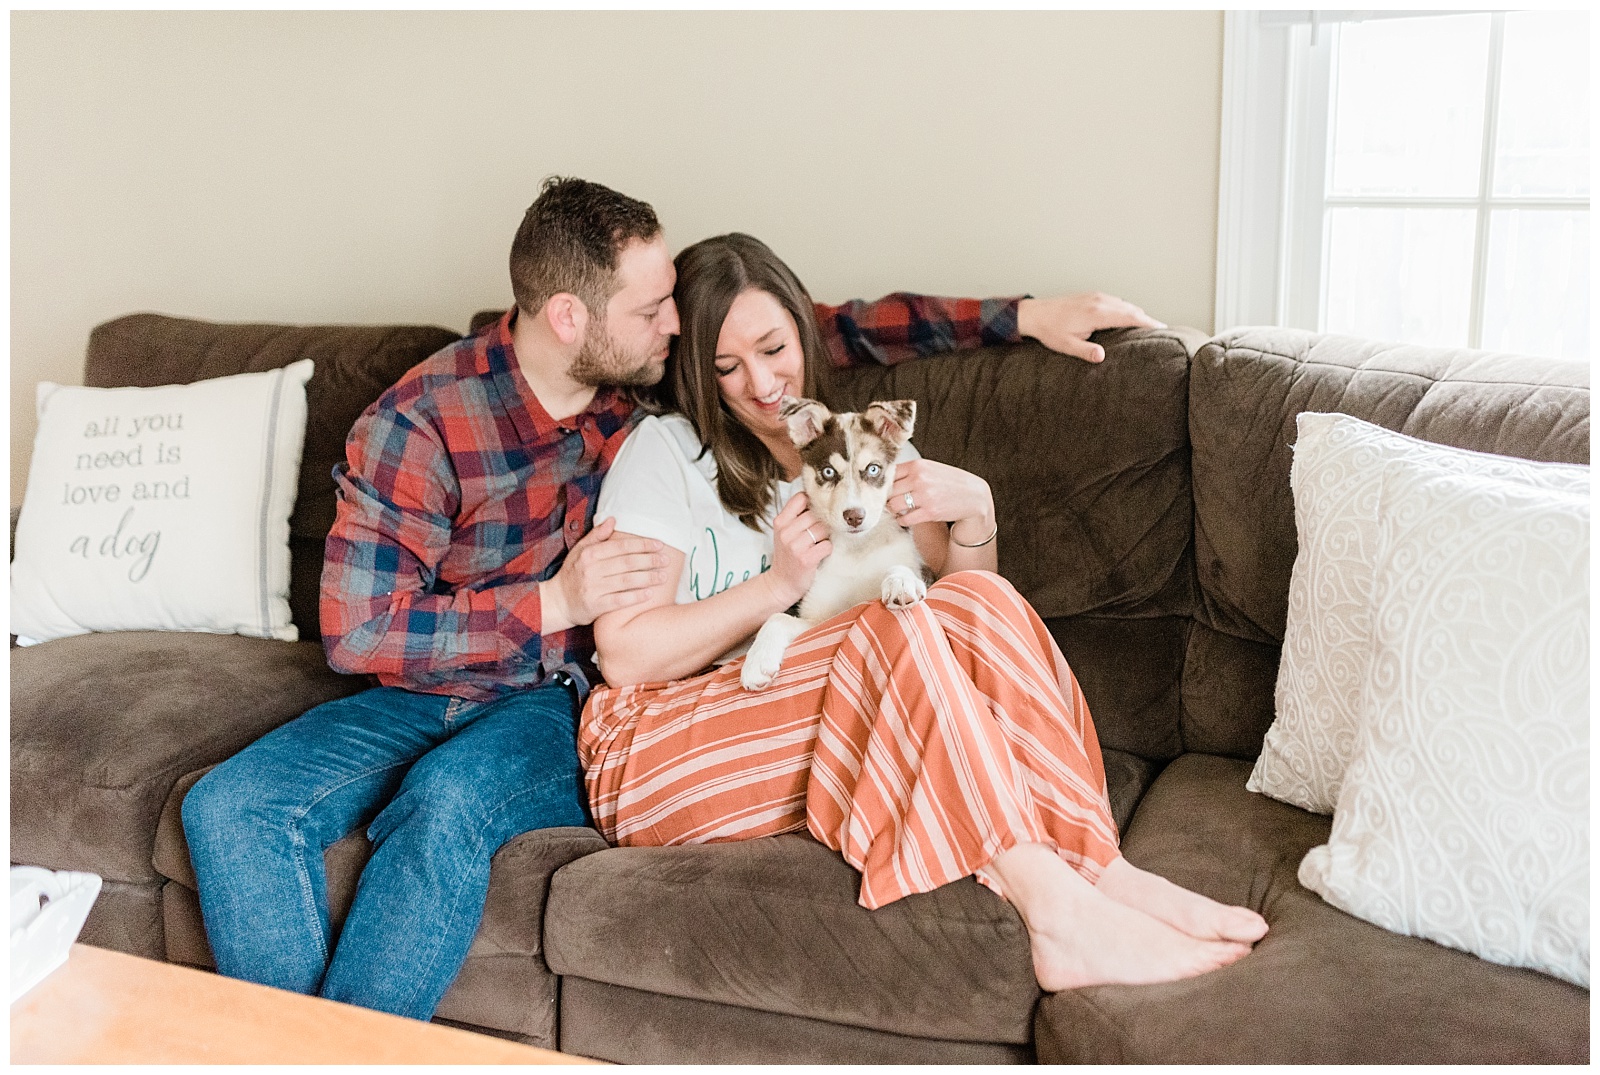 In home photo session, new puppy, casual, weekend, new jersey lifestyle, natural light photographer, anniversary